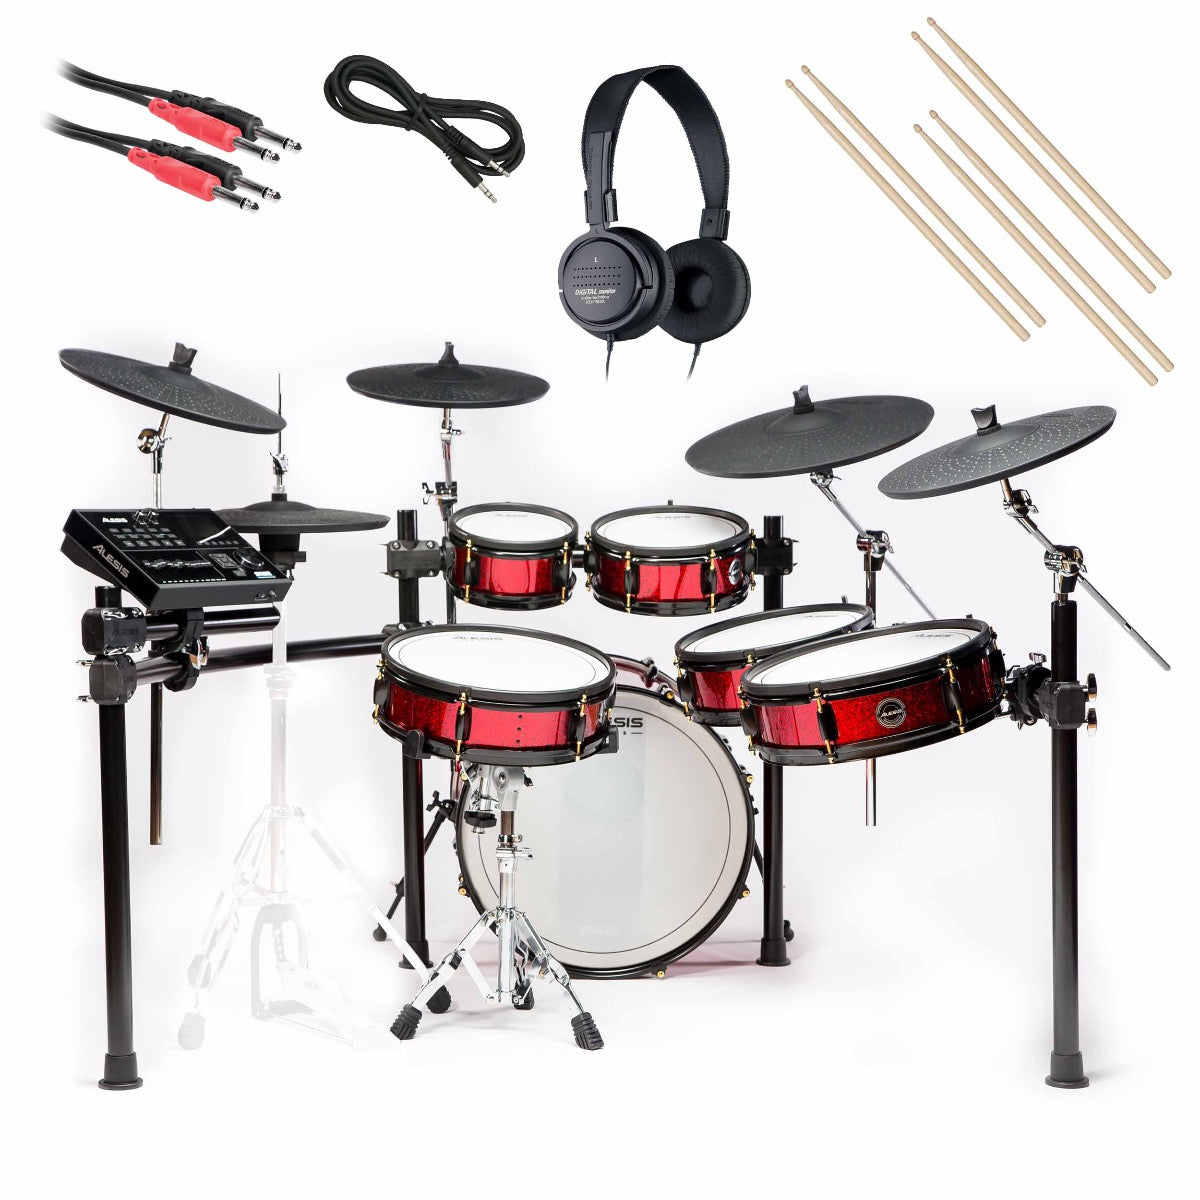 Collage of everything included with the Alesis Strike Pro SE Electronic Drum Set BONUS PAK